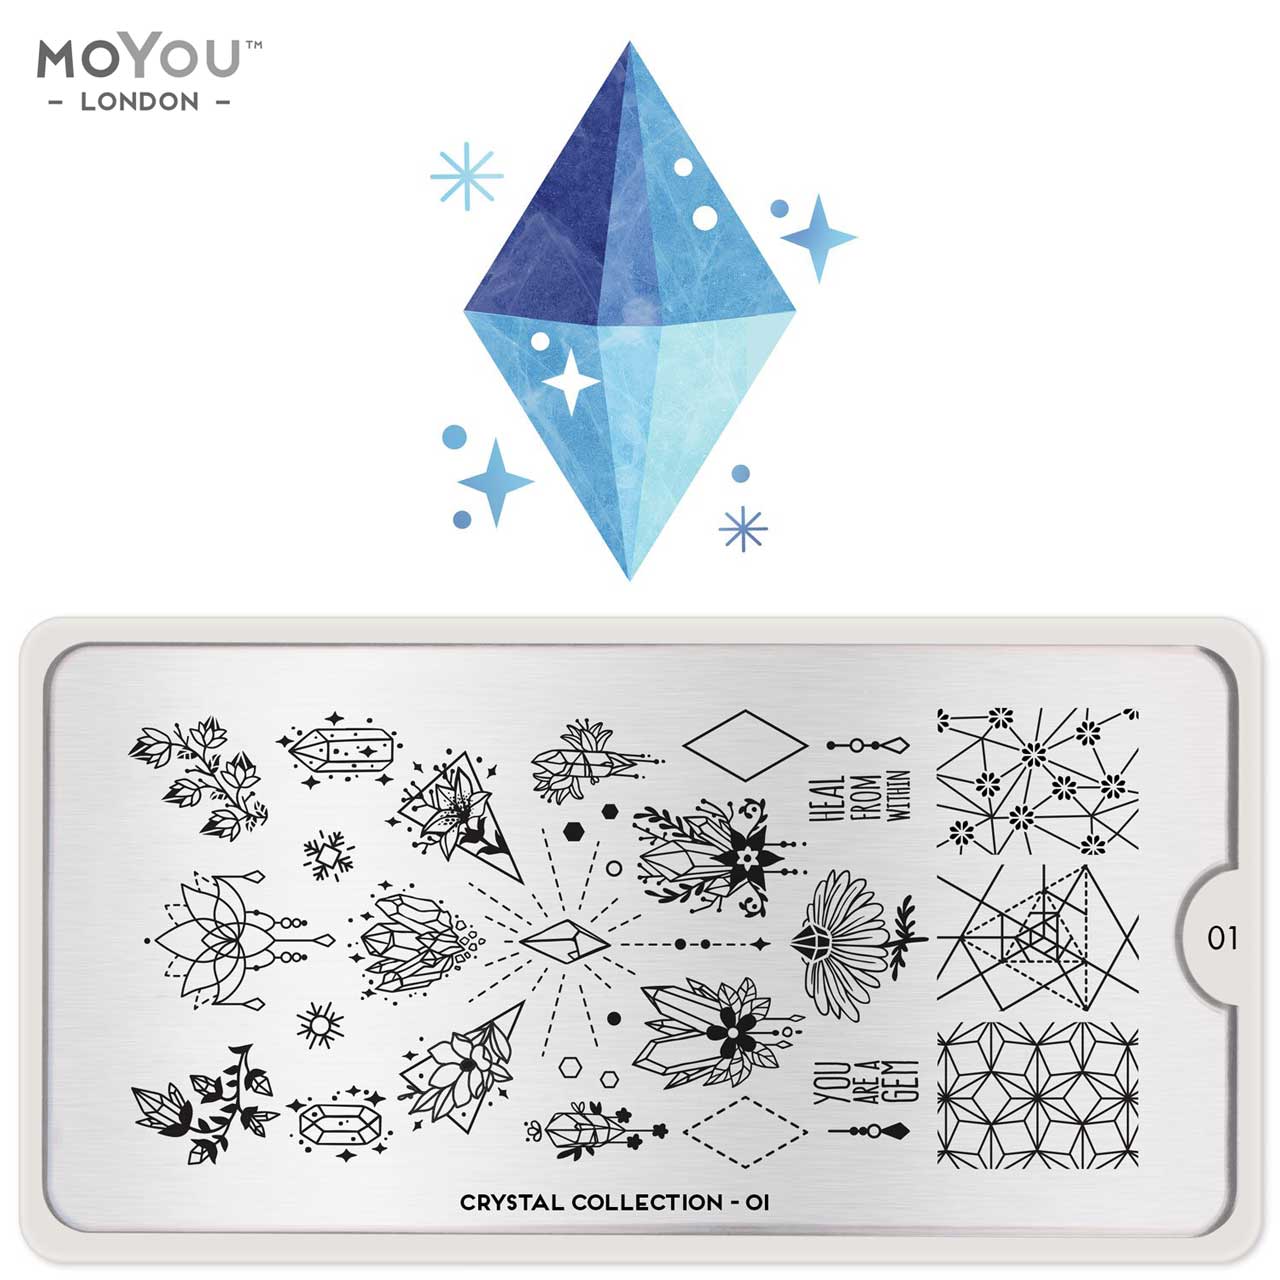 MoYou Stamping Plate Crystal 01